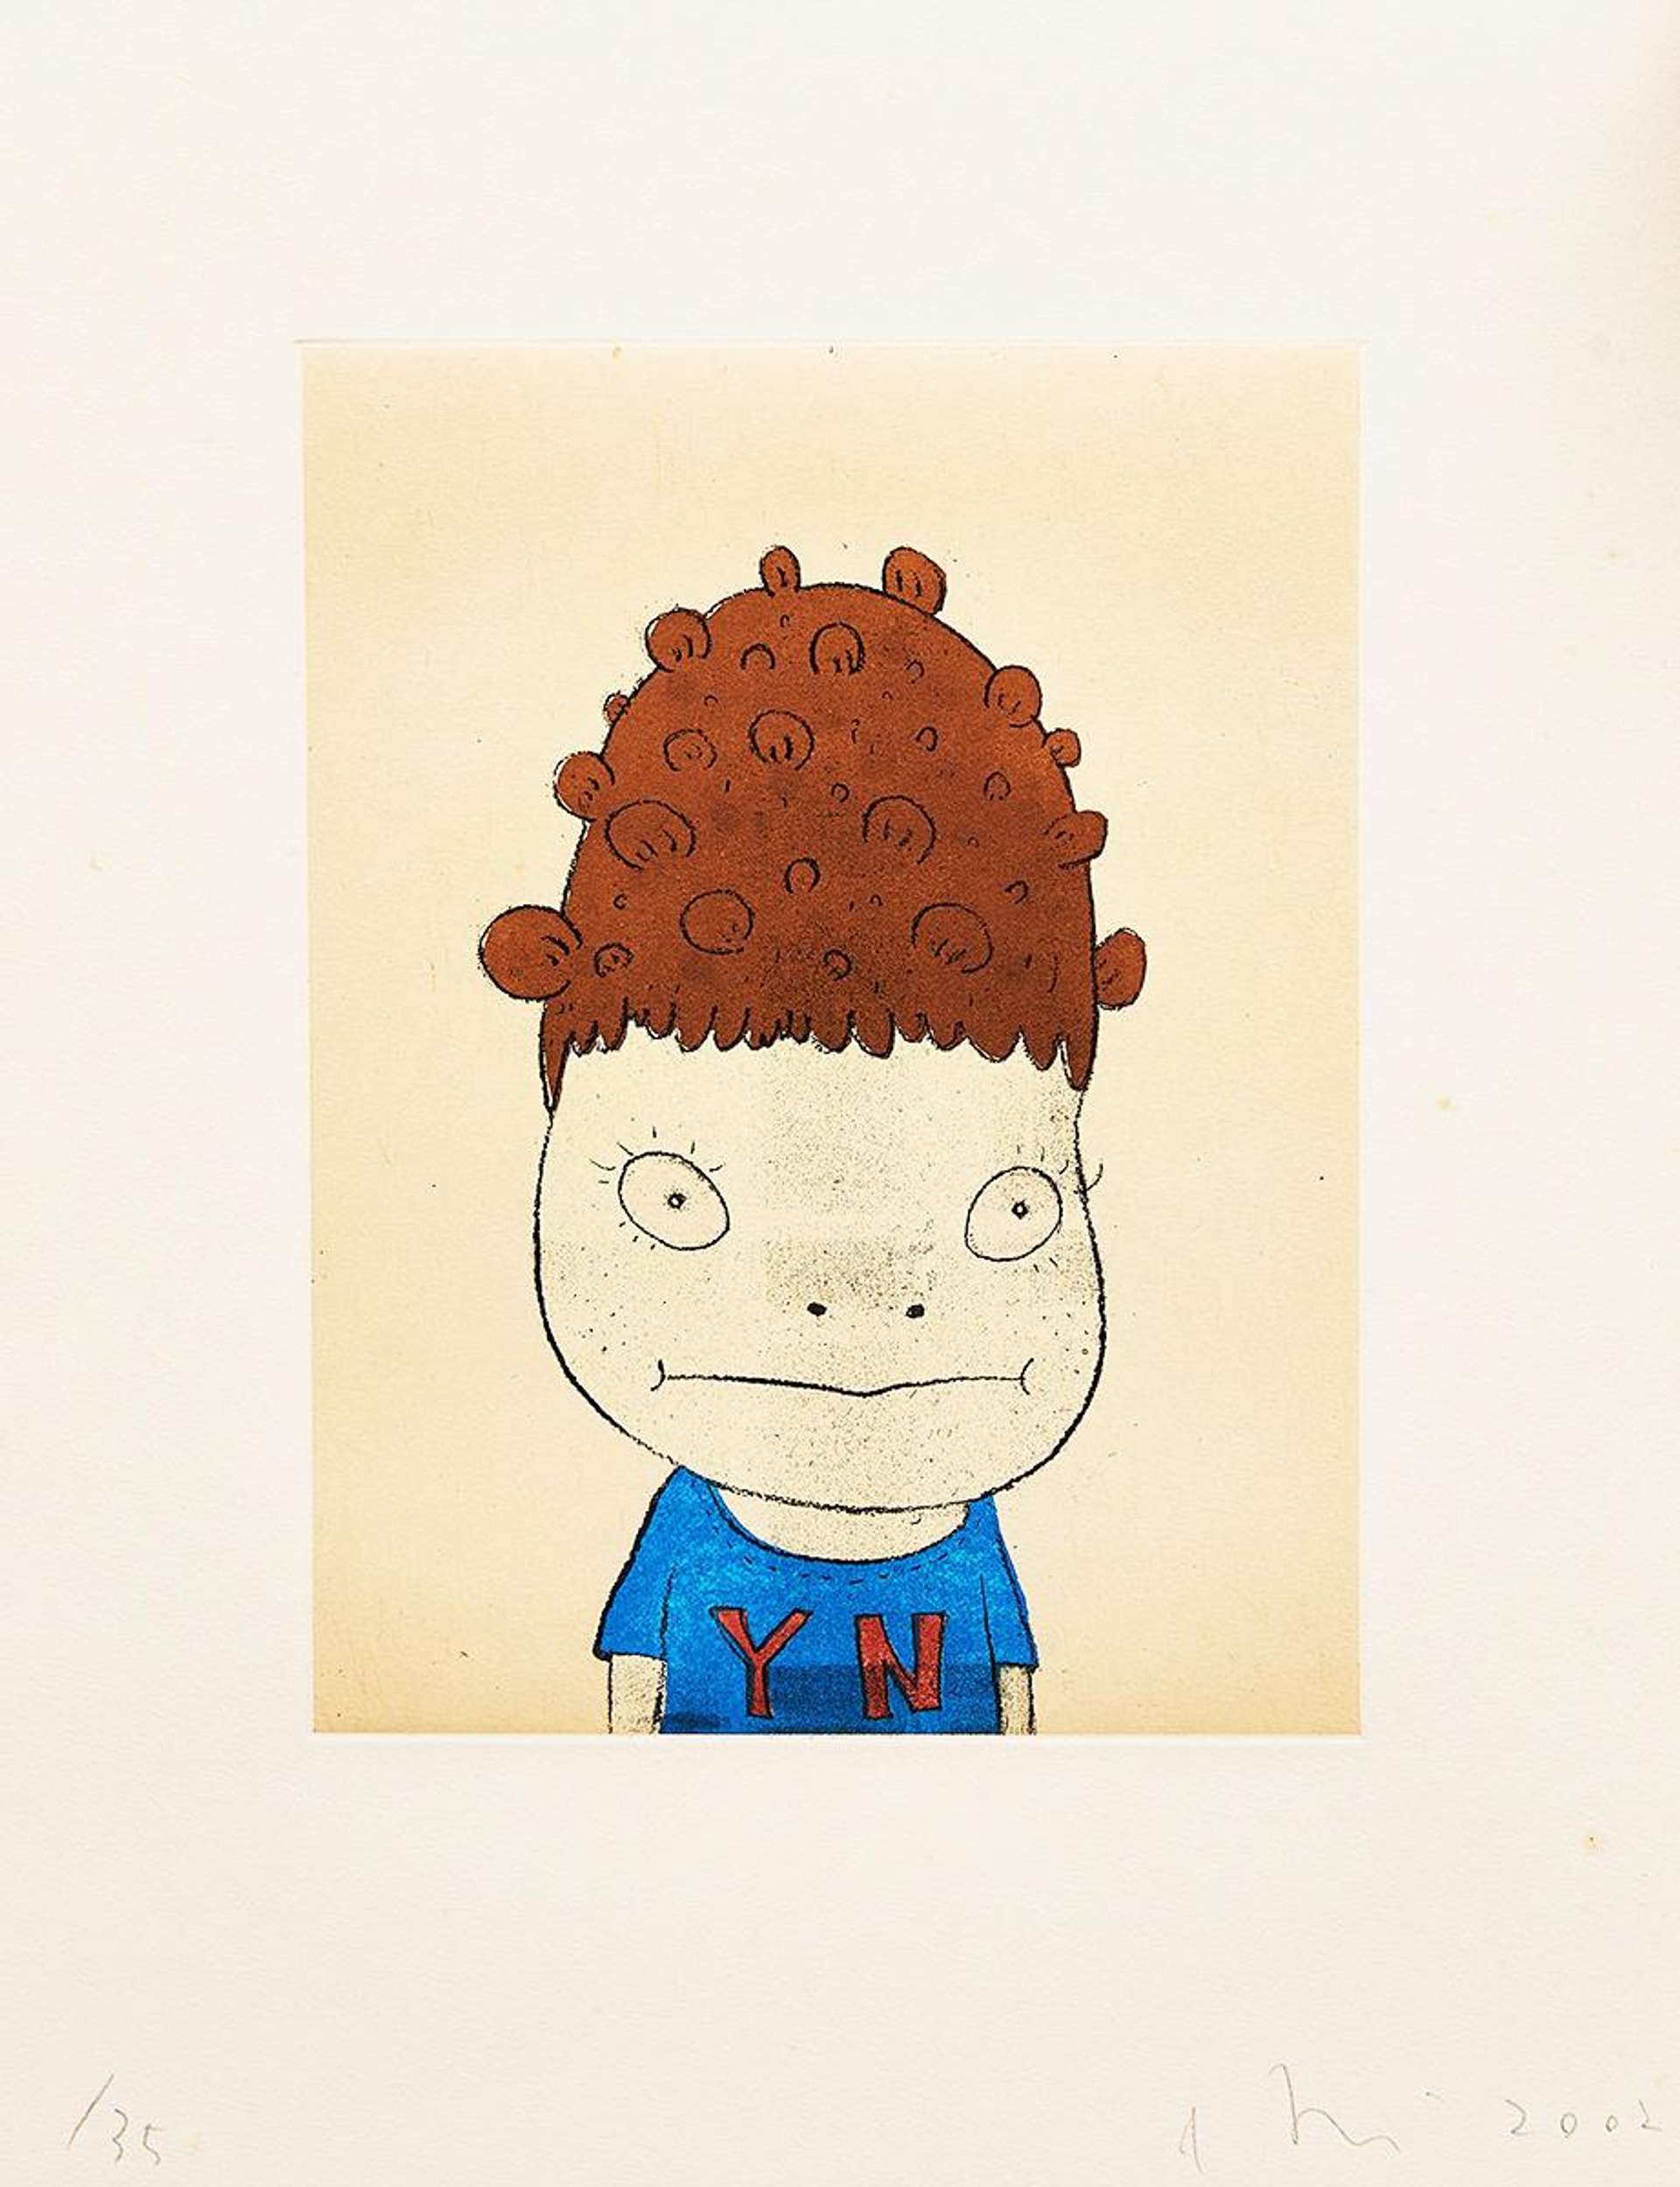 An image of a self-portrait by Yoshitomo Nara. He is shown as almost animal-like, with a very wide mouth and two holes for a nose. His hair is shown in stylised curls.